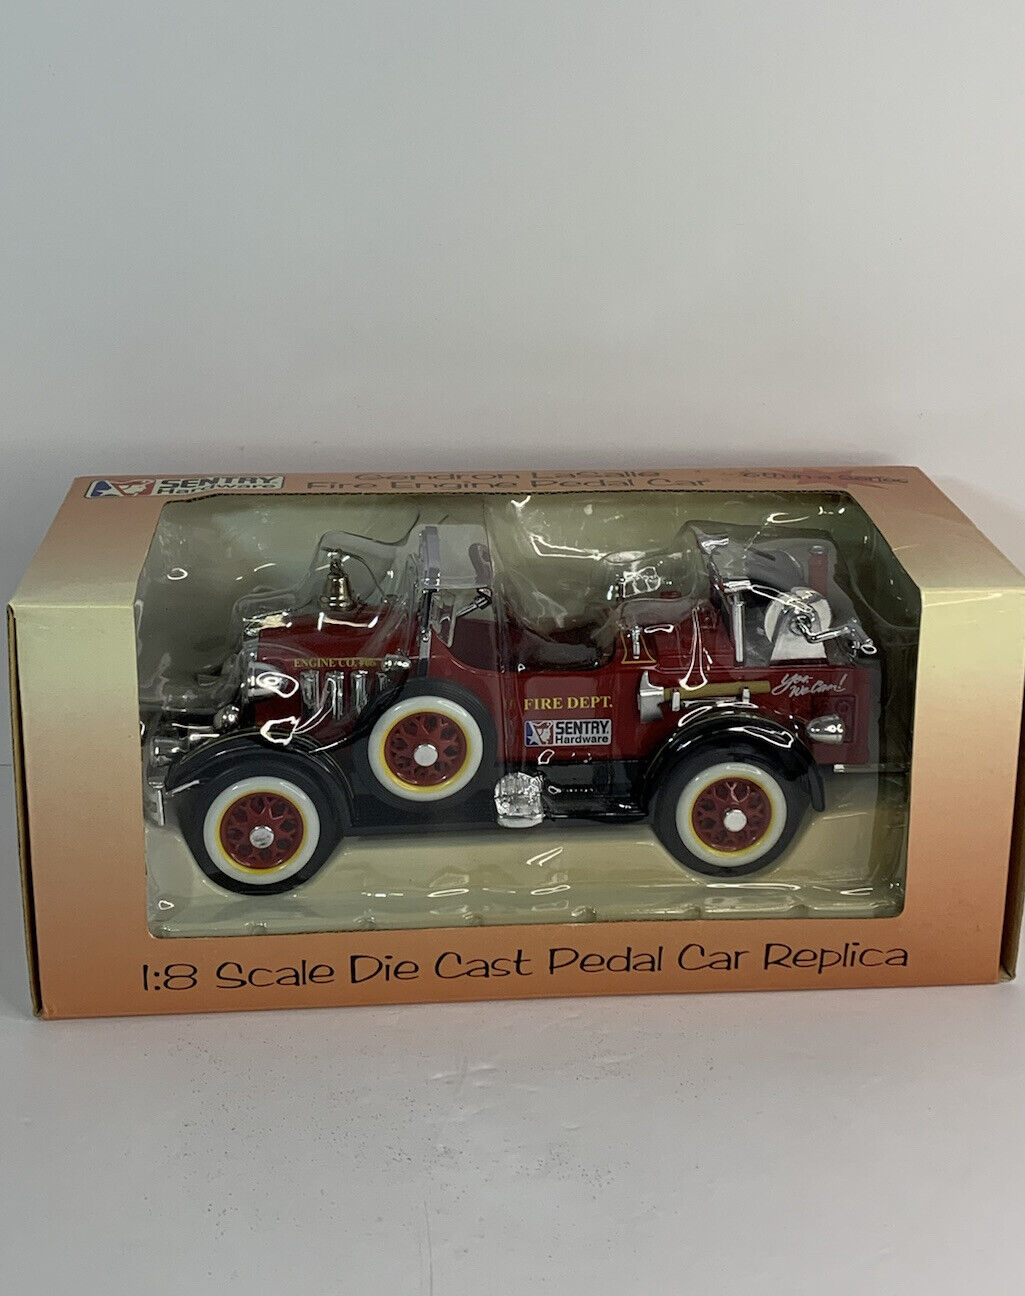 New Sentry Hardware Gendron 1935 Lasalle Fire Truck Pedal Car 1:8 Scale Die Cast